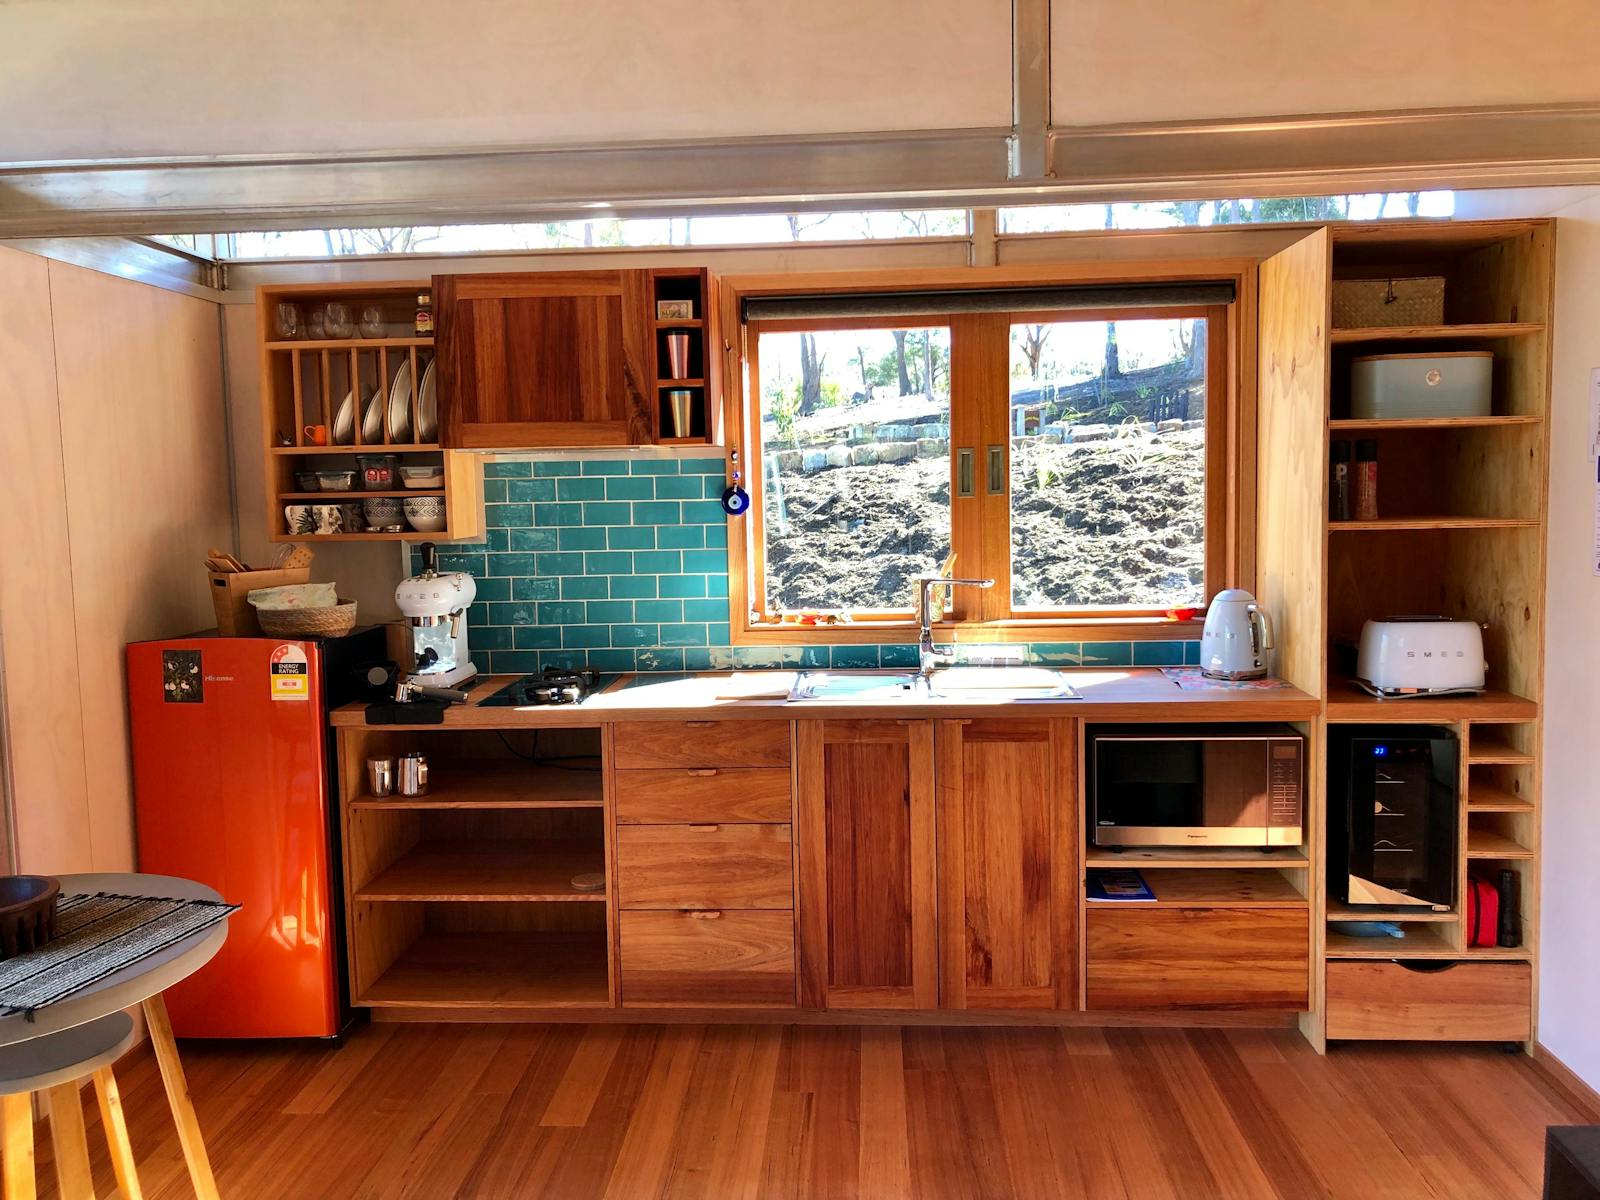 Hand built timber kitchens featuring locally sourced Tasmanian timbers and superb quality appliances